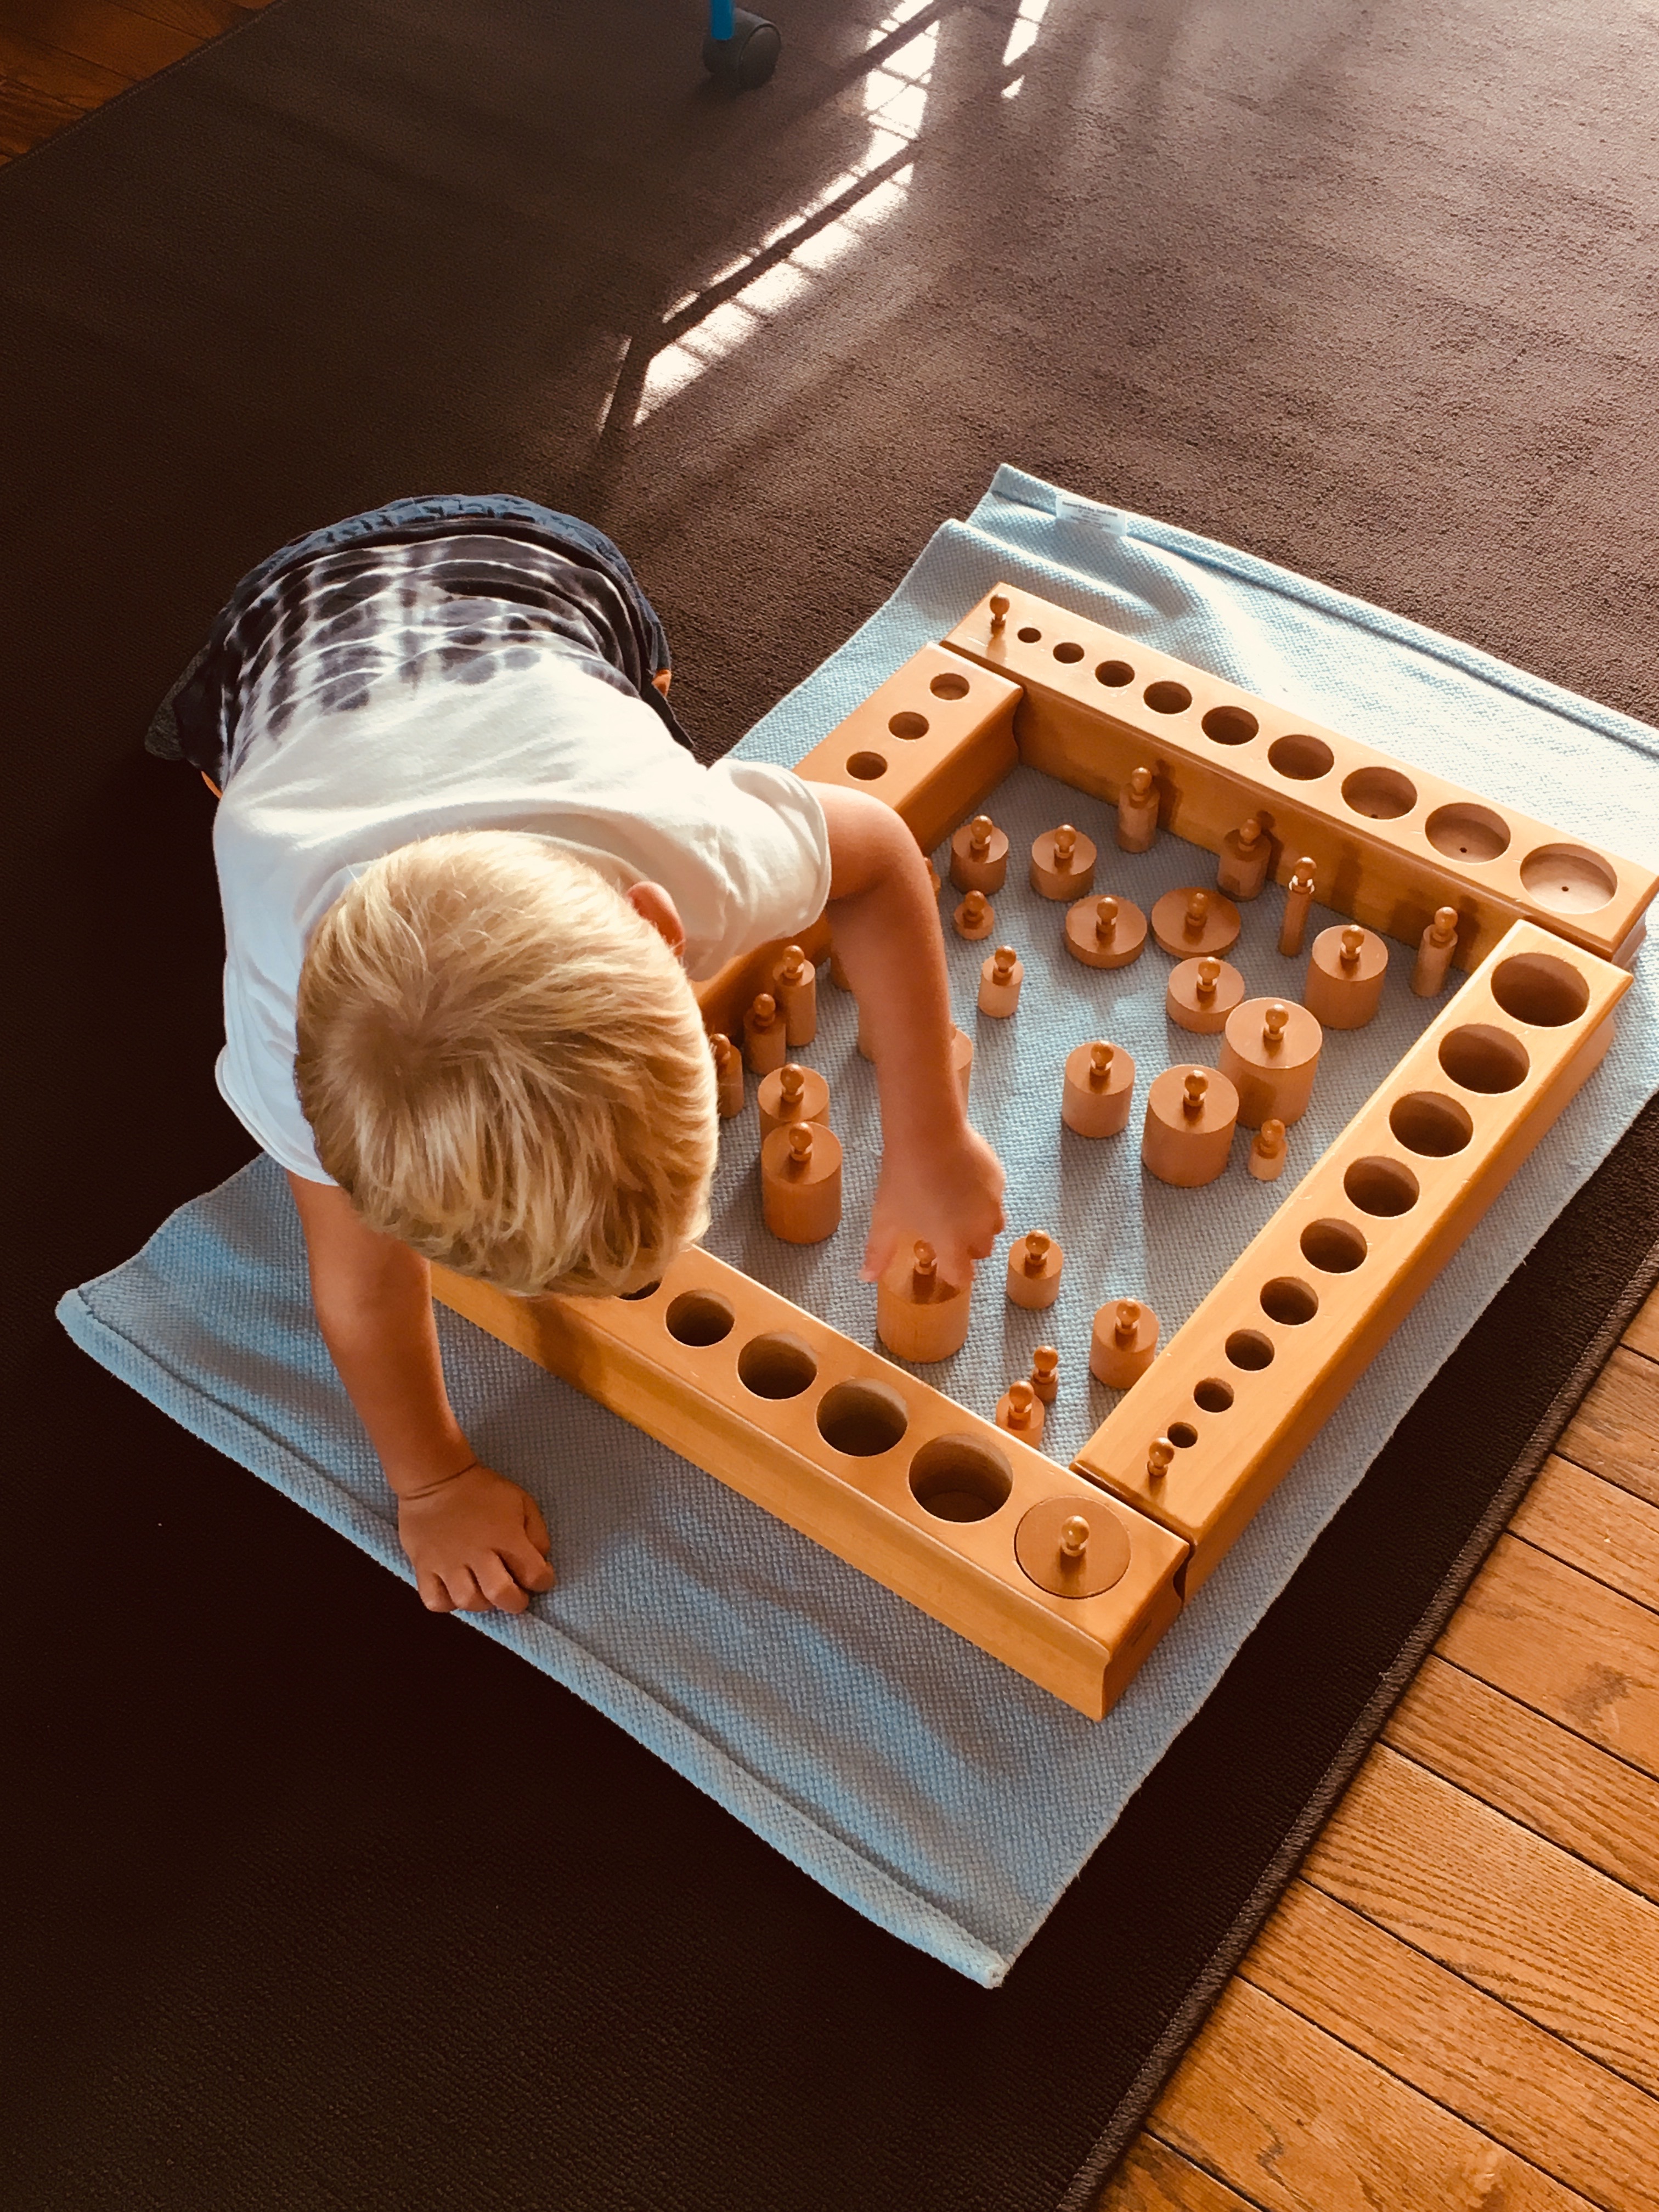 Samuel, age 4, working with all four sets of knobbed cylinders.